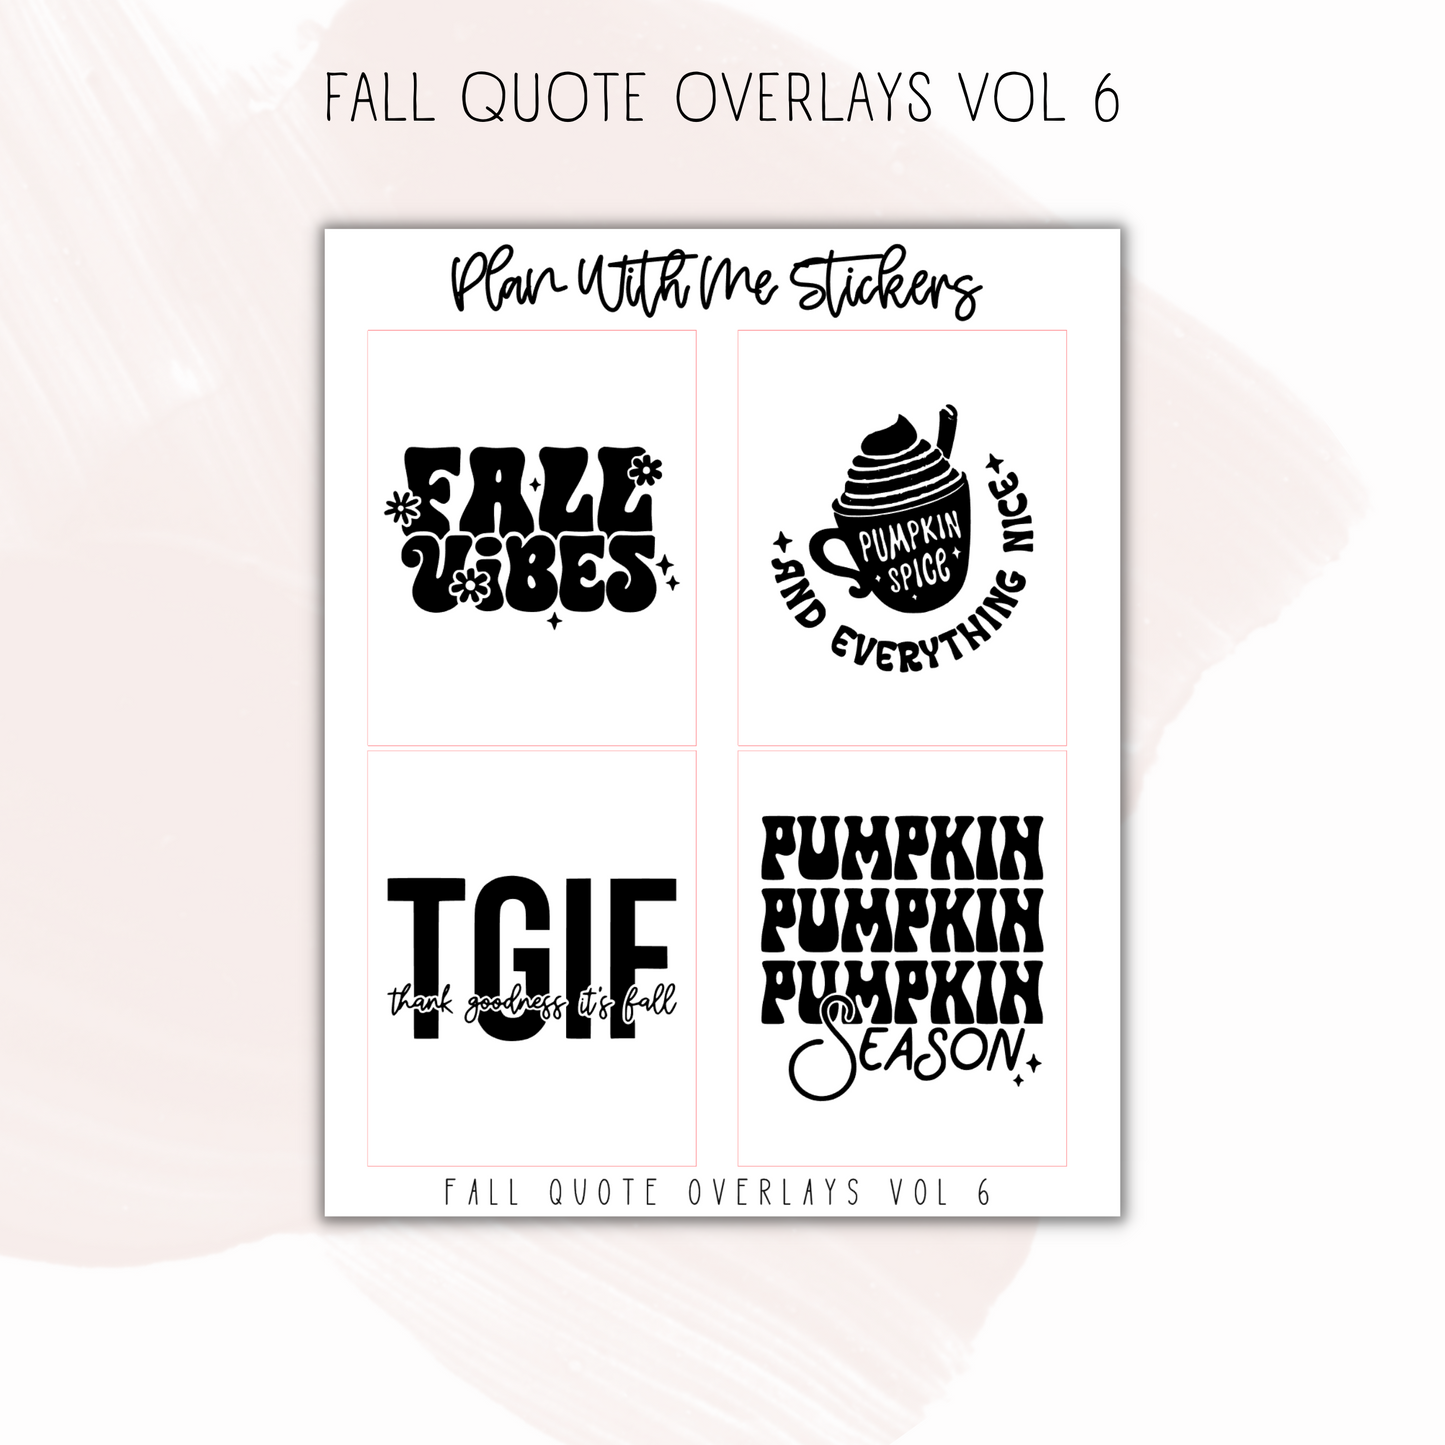 Fall Quote Overlays Vol 6